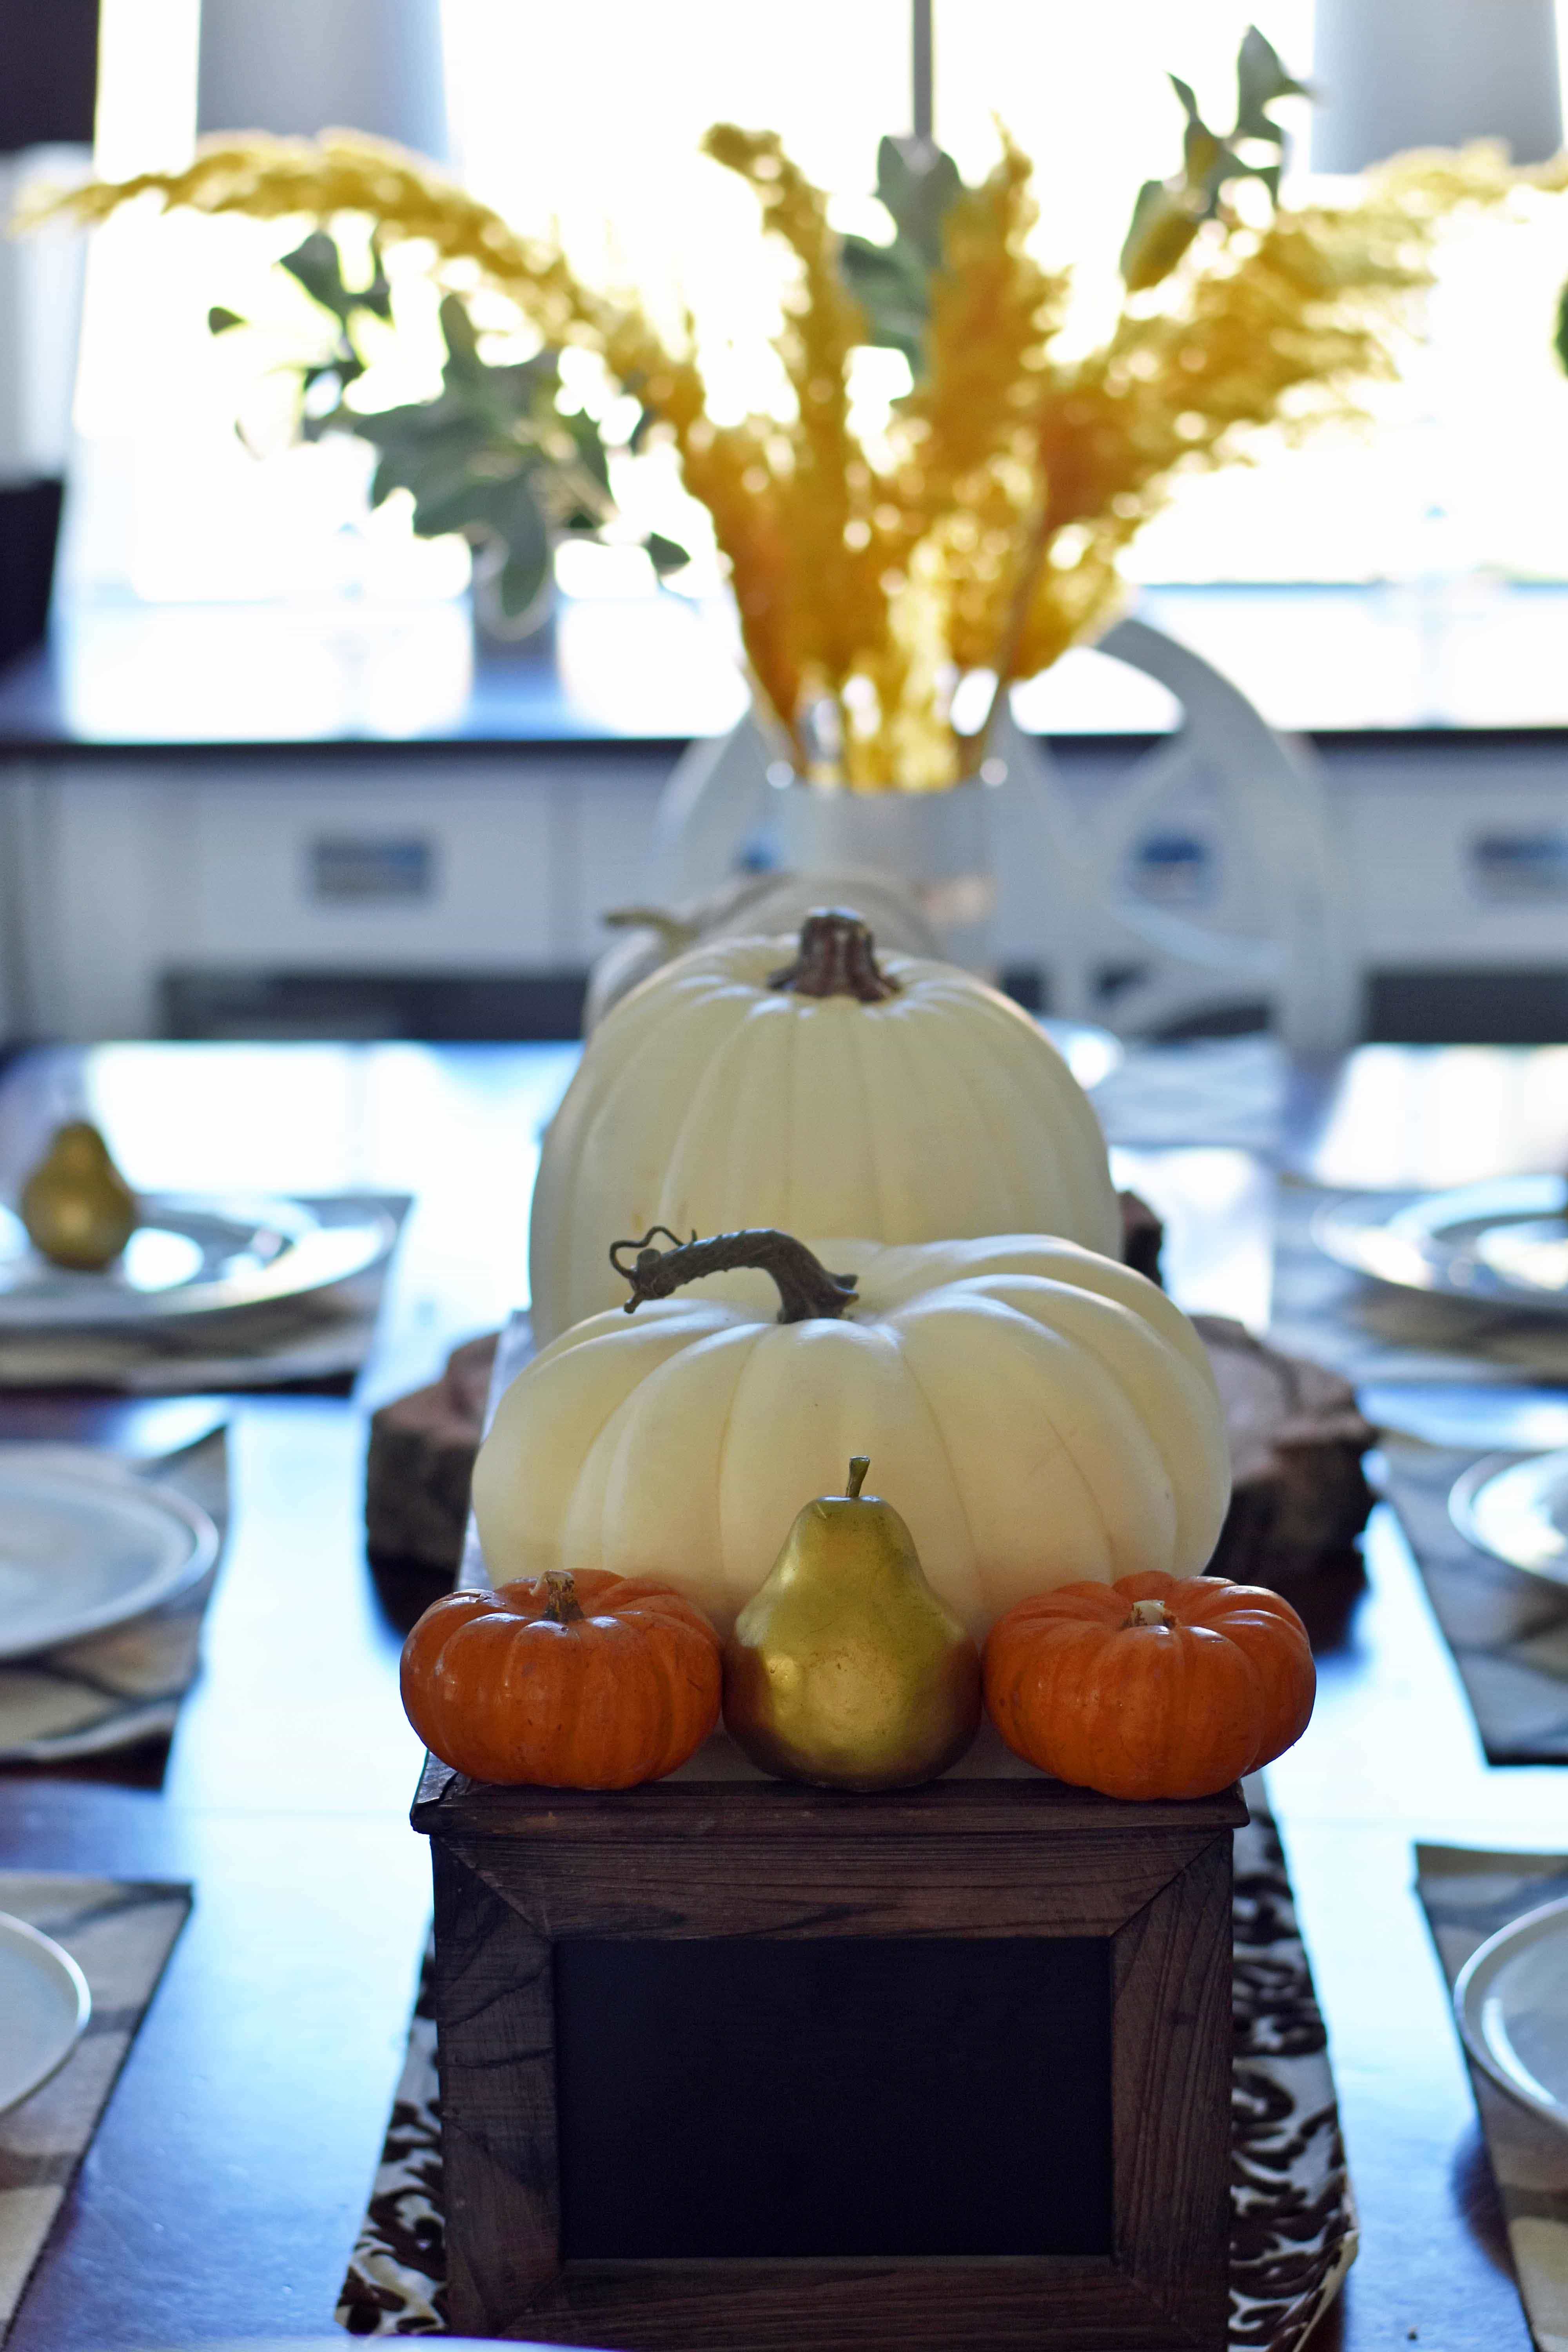 Fall Dining Room Table Decor Ideas. Craspedia Yellow Billy Ball Flowers in vintage vases. White pumpkins in wire baskets. Black and white striped pumpkin. Natural lamps, white entry table, and fall decor. Fixer Upper cotton ball stems. How to decorate your home for Fall.